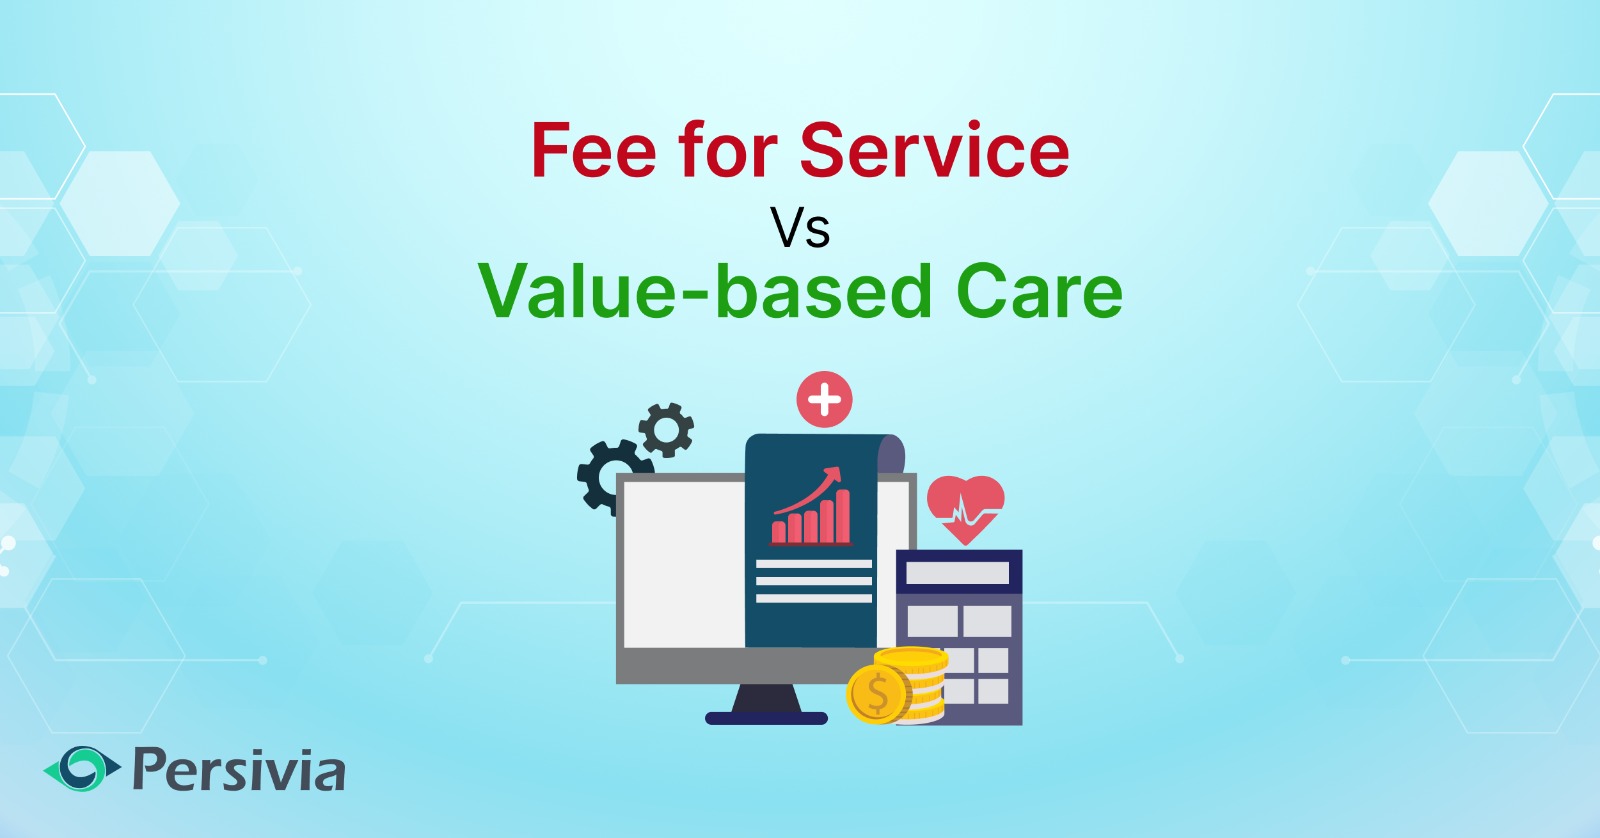 Fee for Service vs Value-based care